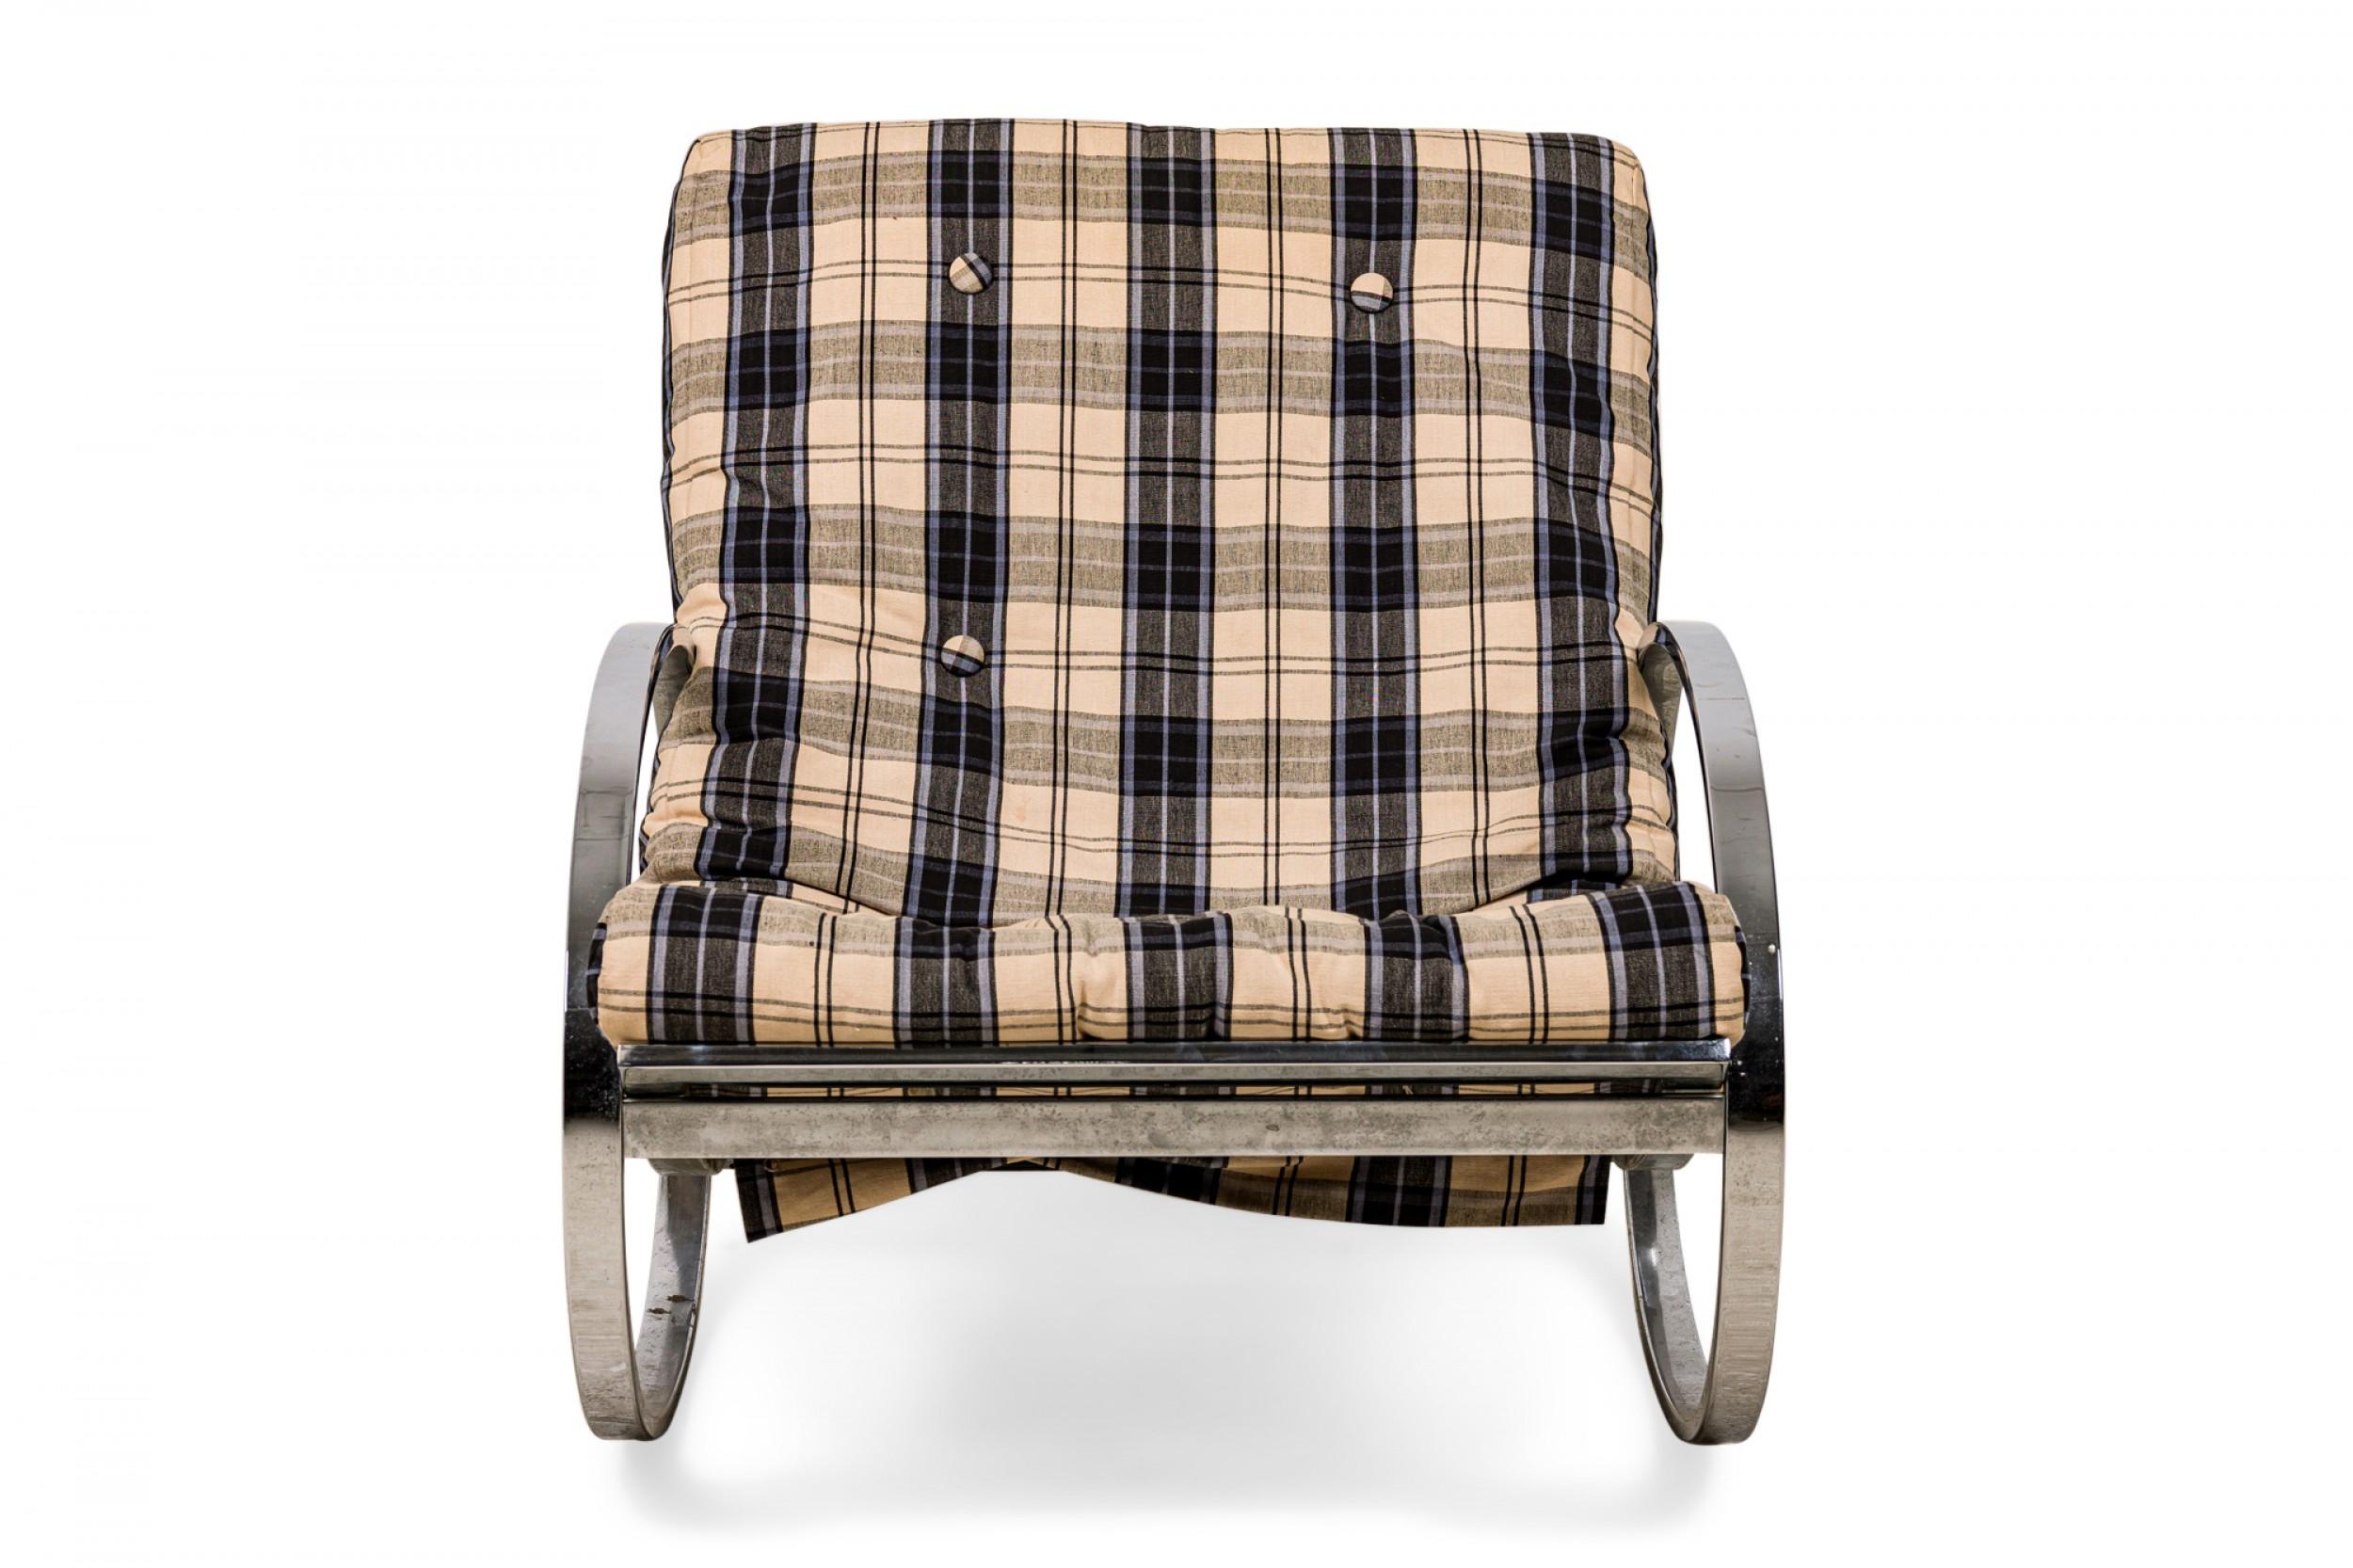 Italian mid-century (circa 1970) ellipse-form rocking chair with a polished chrome frame with rockers and arms composed of the same elliptical pieces on either side, upholstered in a beige, black, and blue plaid fabric with button tufted detail.